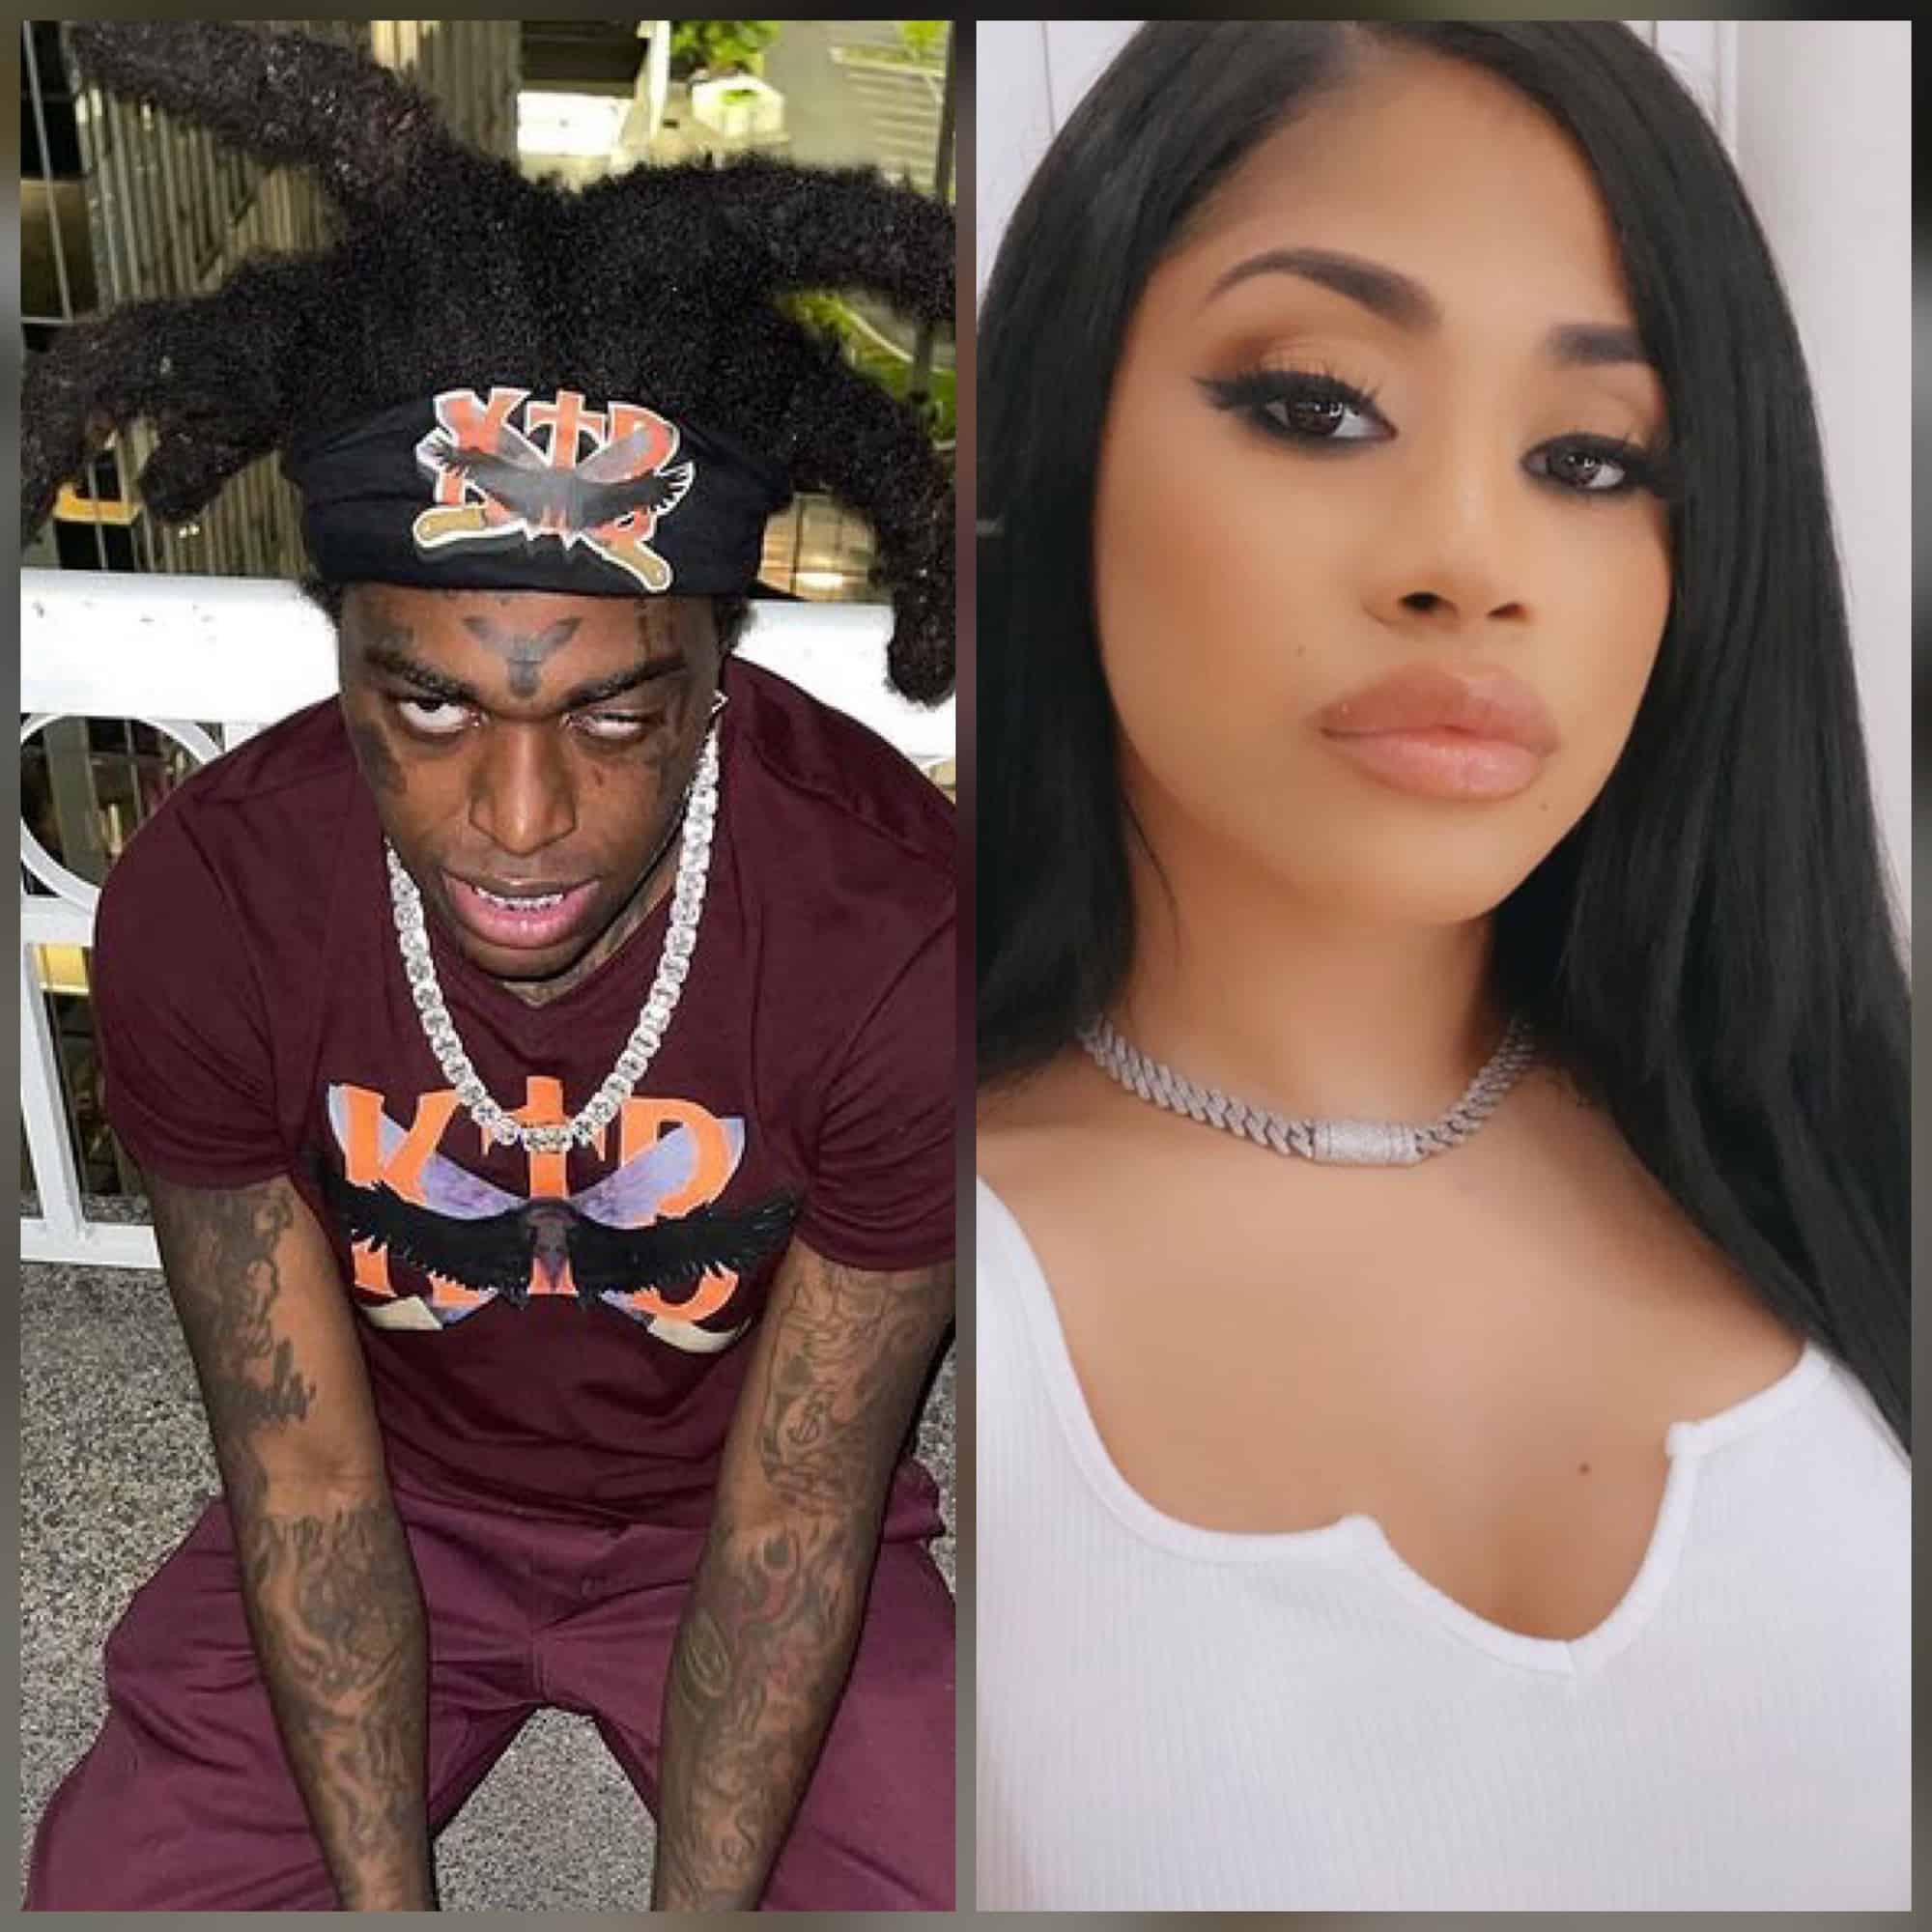 Kodak Black Attempts To Shoot His Shot At Cardi Bs Sister Hennessy Carolina With Instagram Post